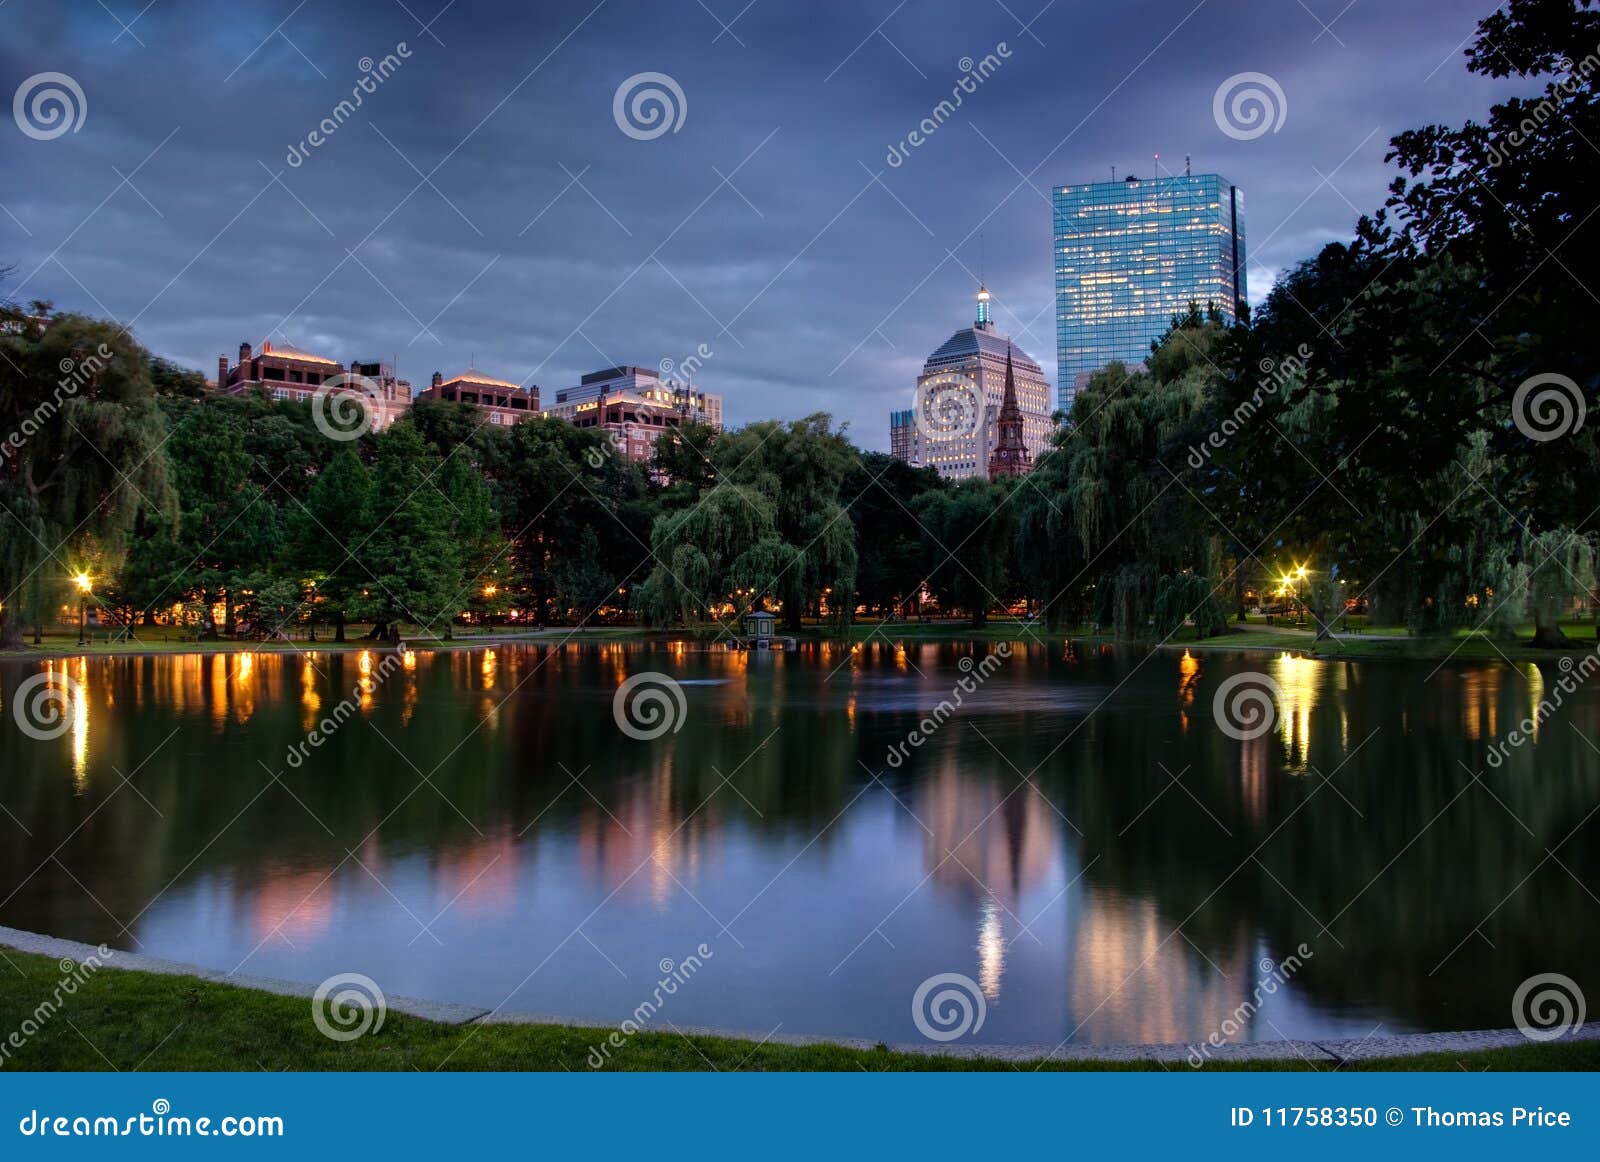 View of the Hancock Towers Over Boston at Dusk Stock Photo - Image of ...